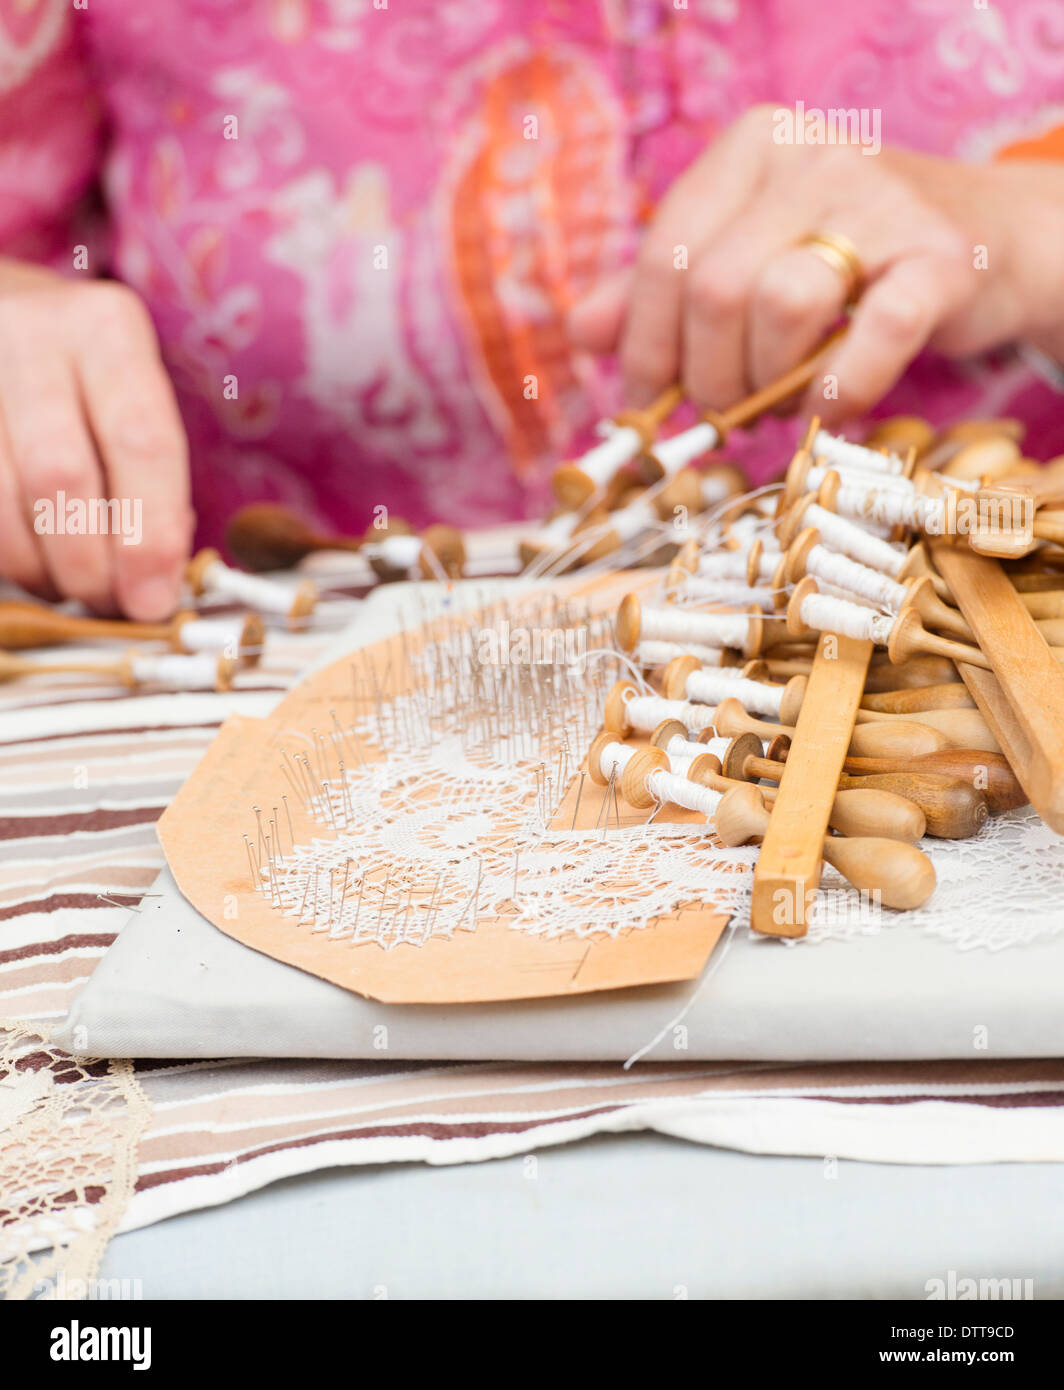 Close up of lacemaking artisan, an elderly woman working on a lace pattern. Stock Photo